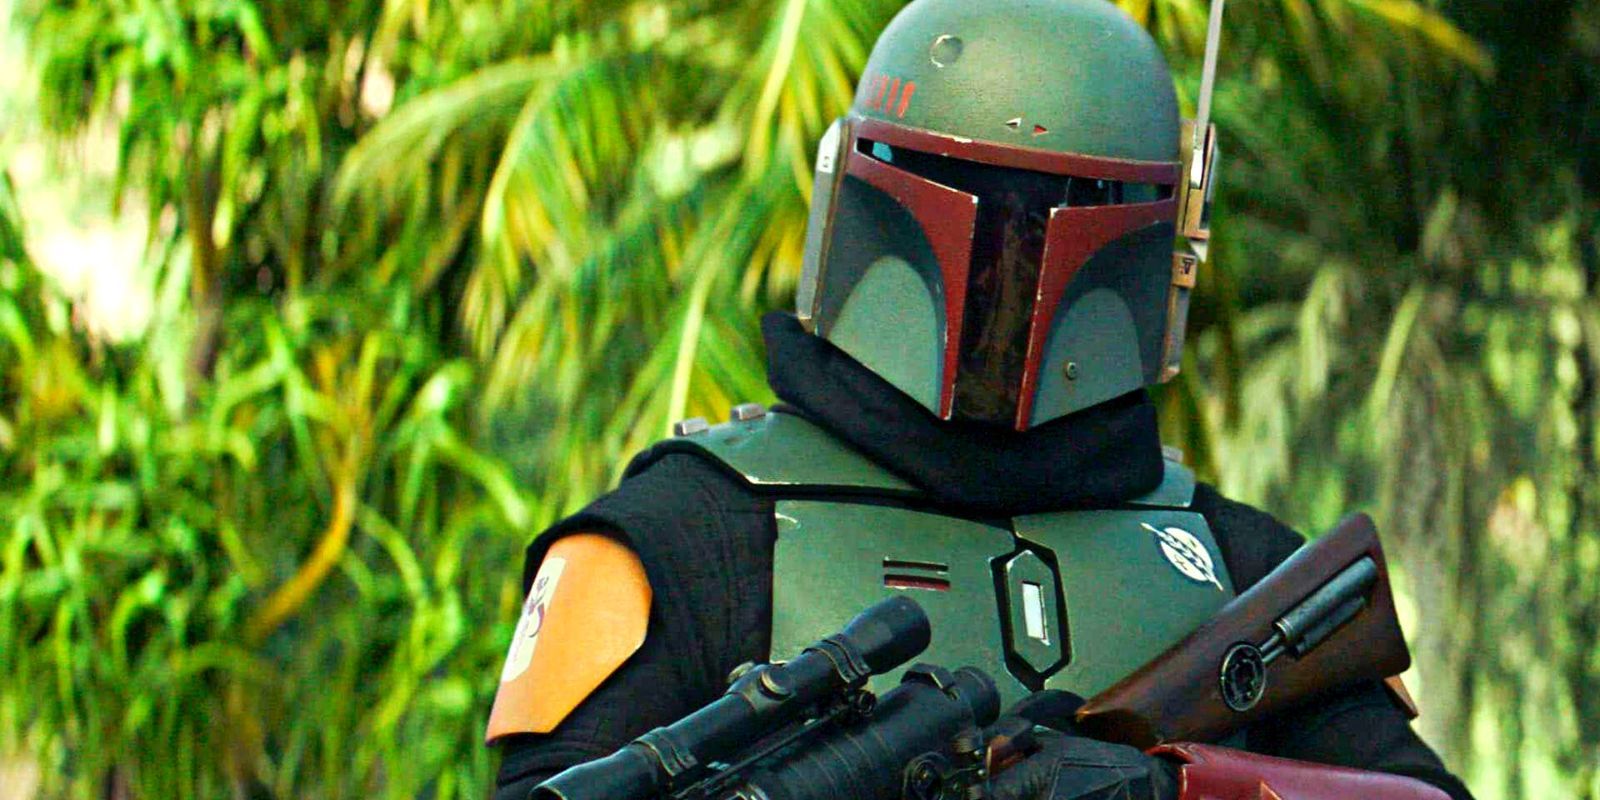 Boba Fett holding a rifle in front of a green forest